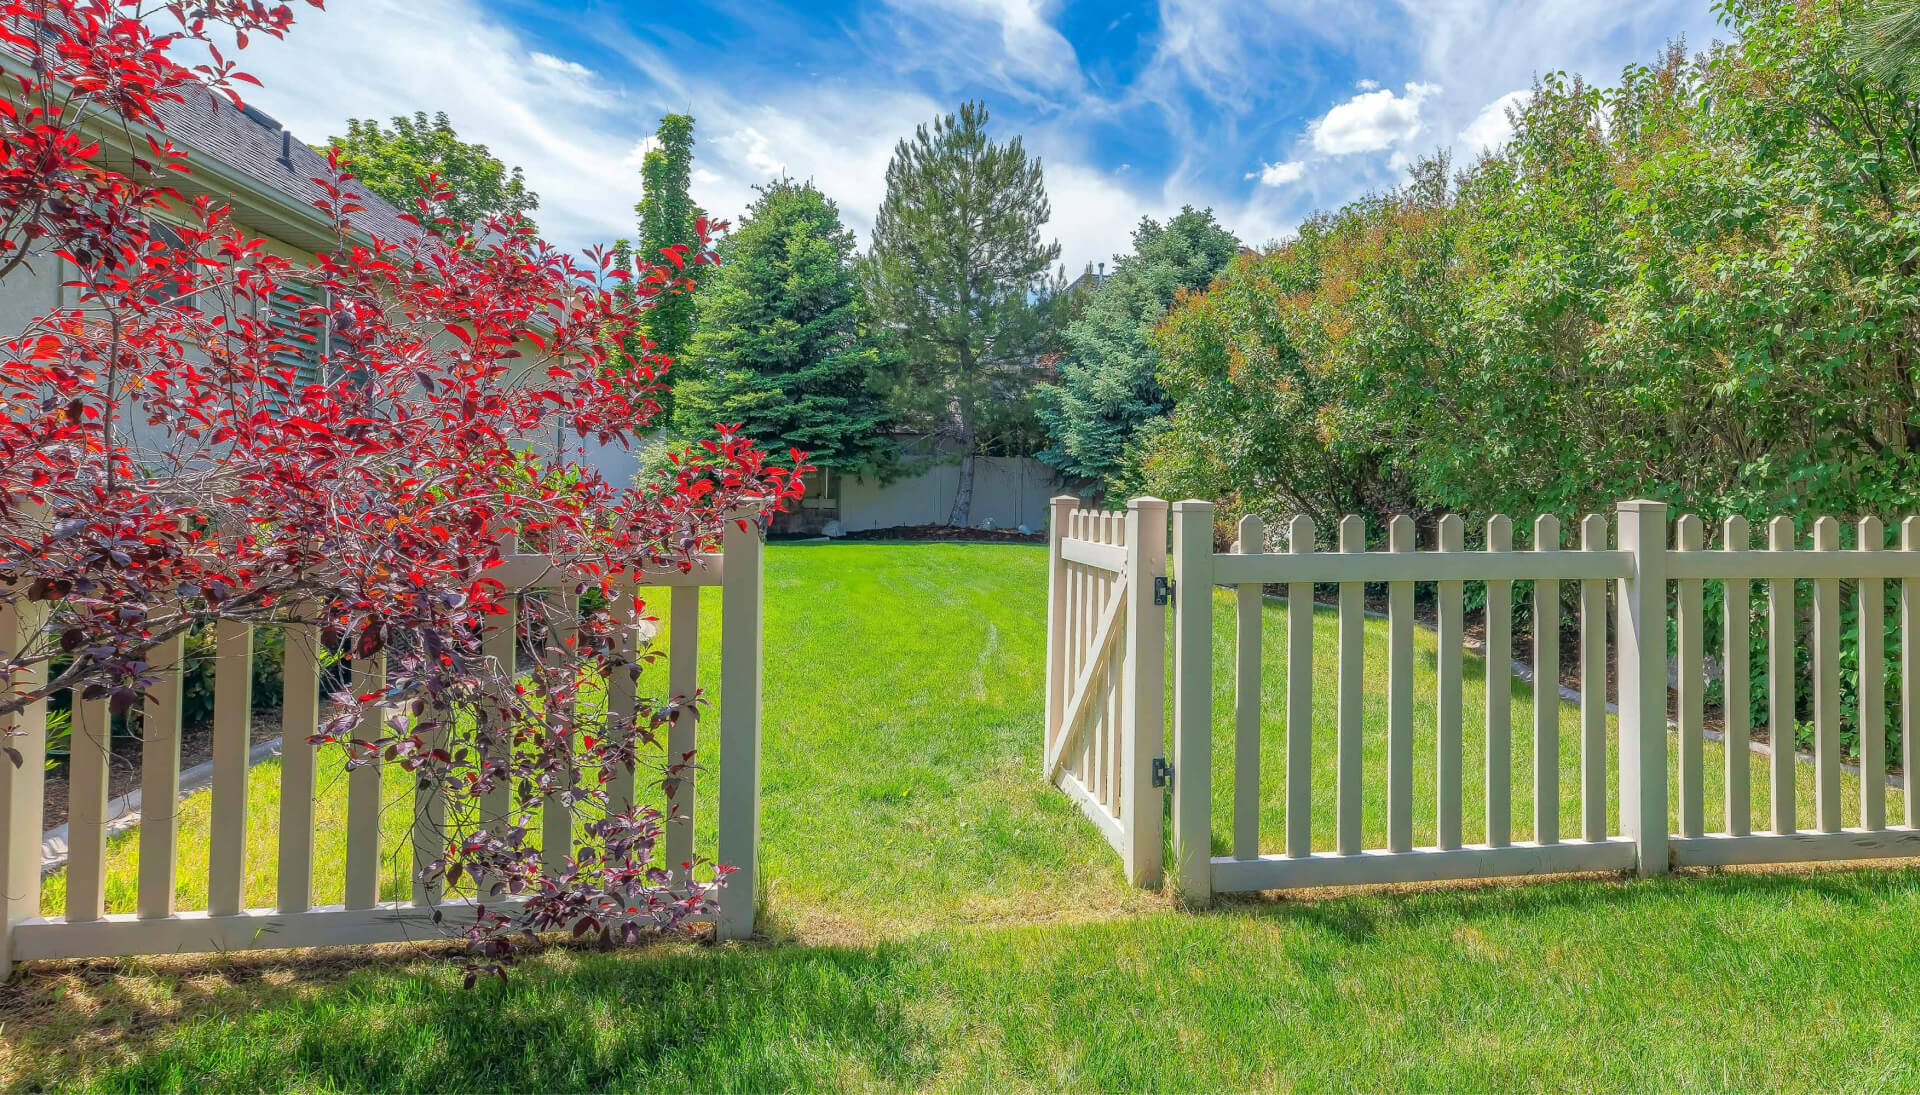 Fence gate installation services in Tallahassee